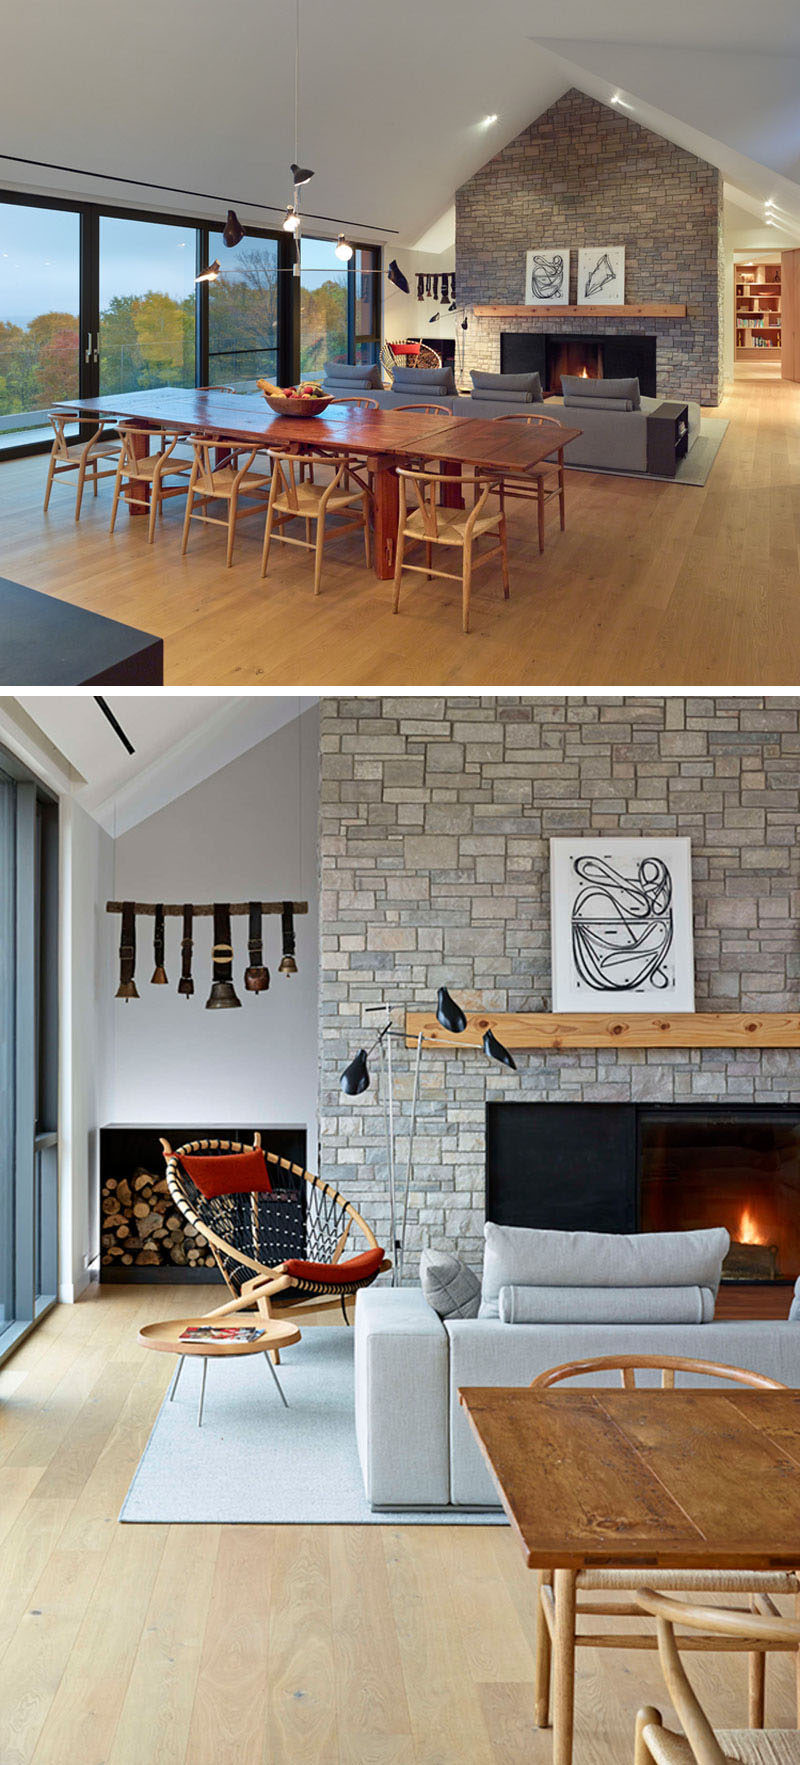 The main living area of this home has a large stone feature wall that surrounds a fireplace and wooden mantle.